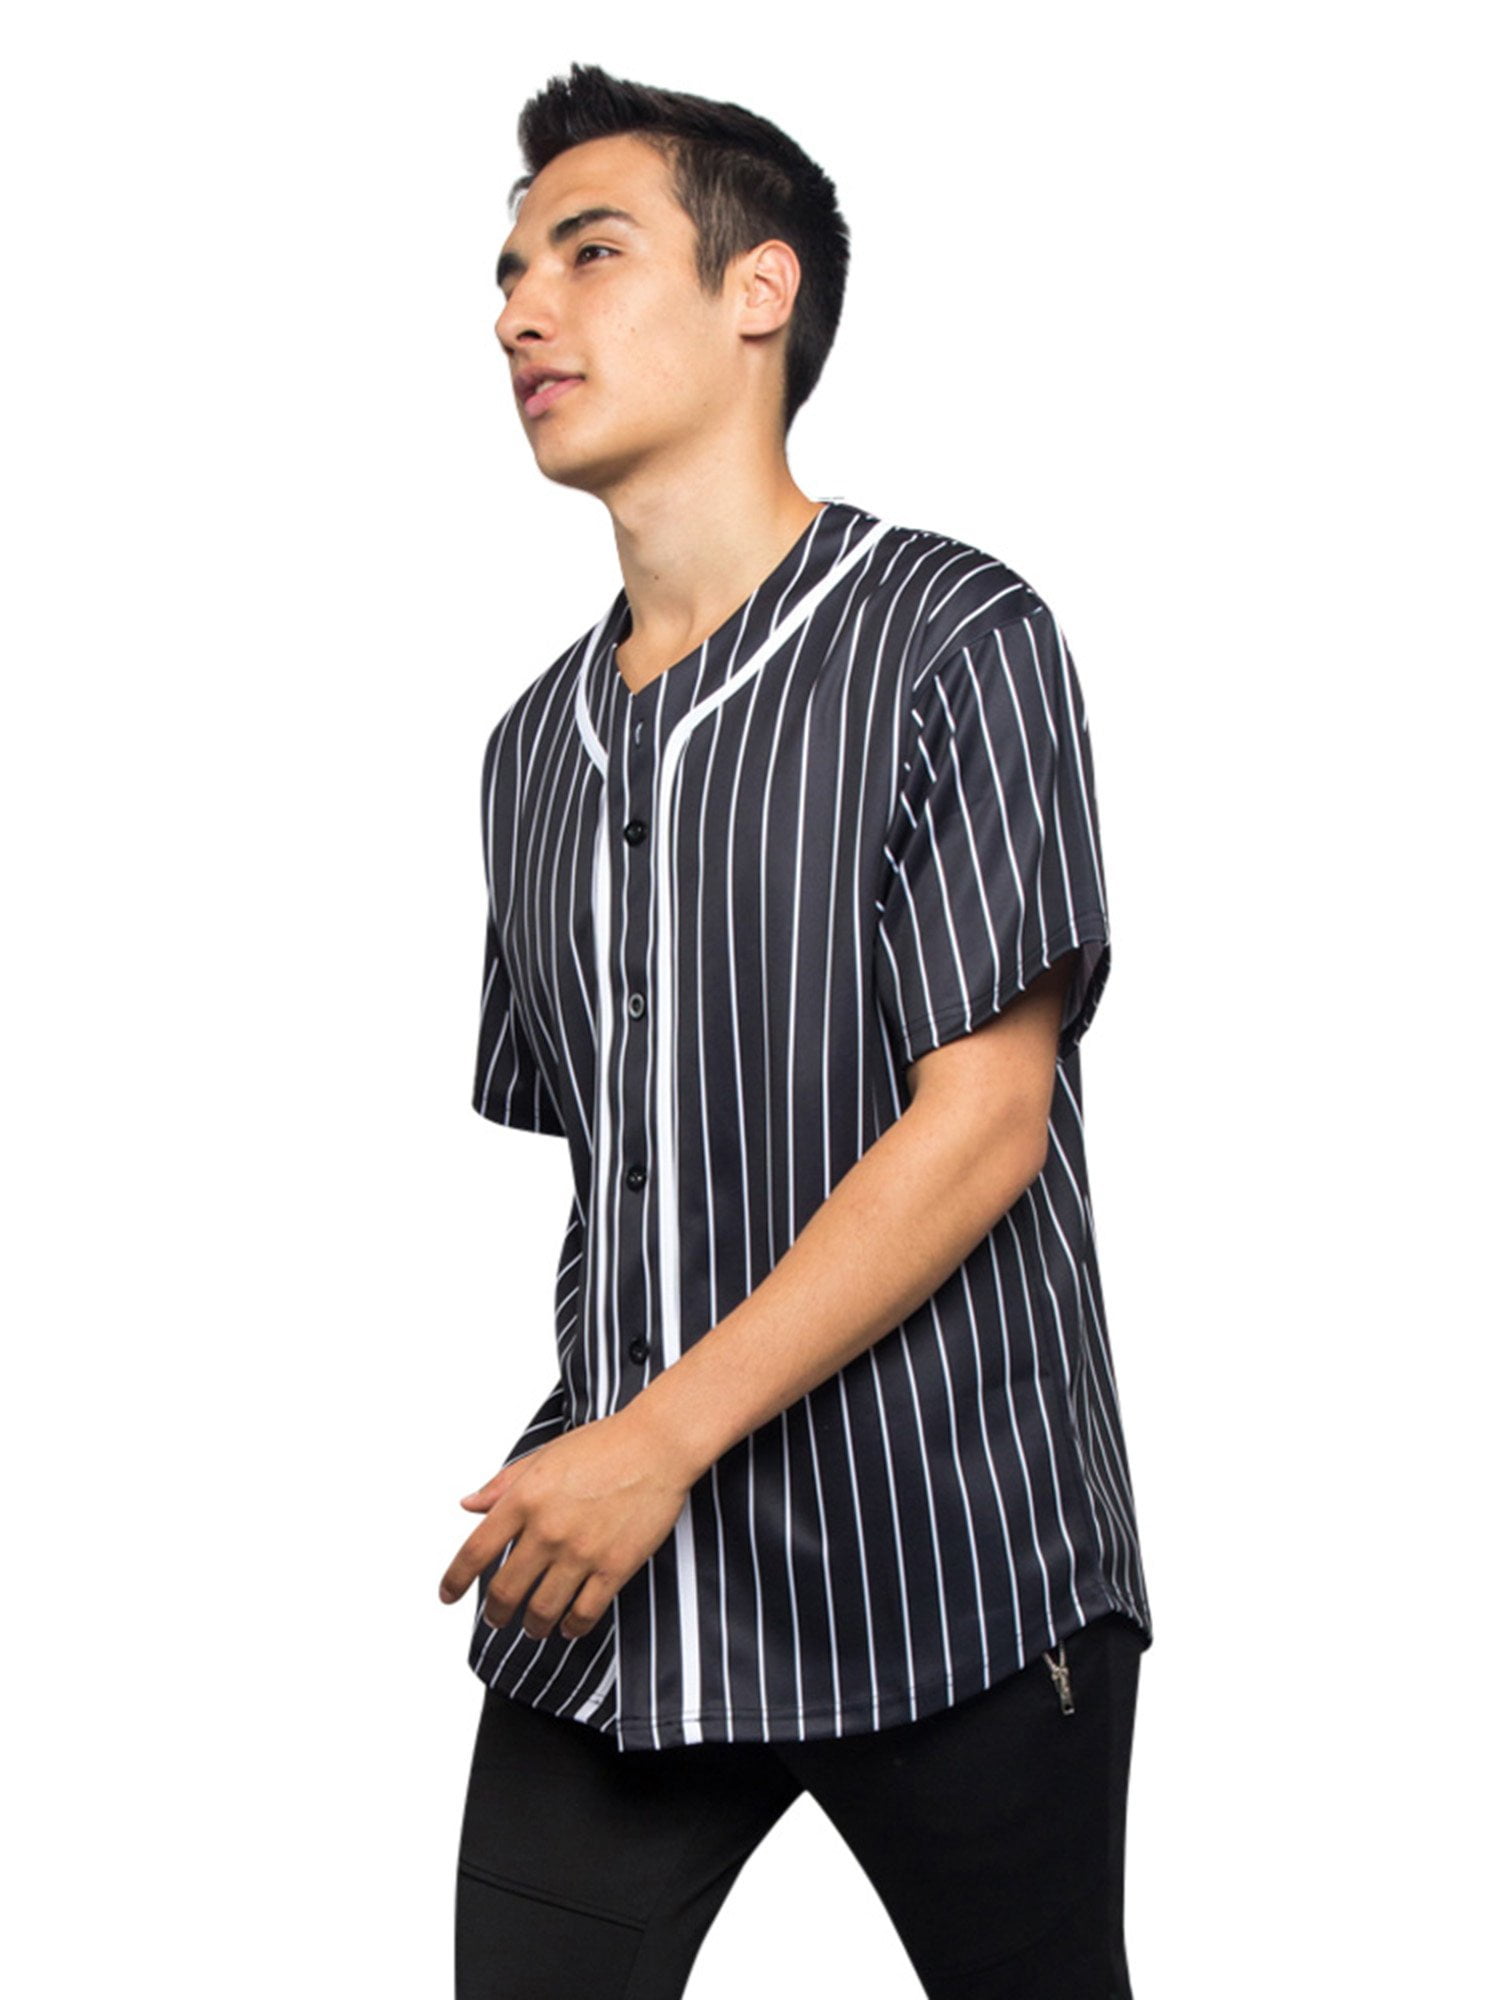  TOPTIE Sportswear Pinstripe Baseball Jersey for Men and Boy,  Button Down Jersey-White Black-YM 10/12 : Clothing, Shoes & Jewelry